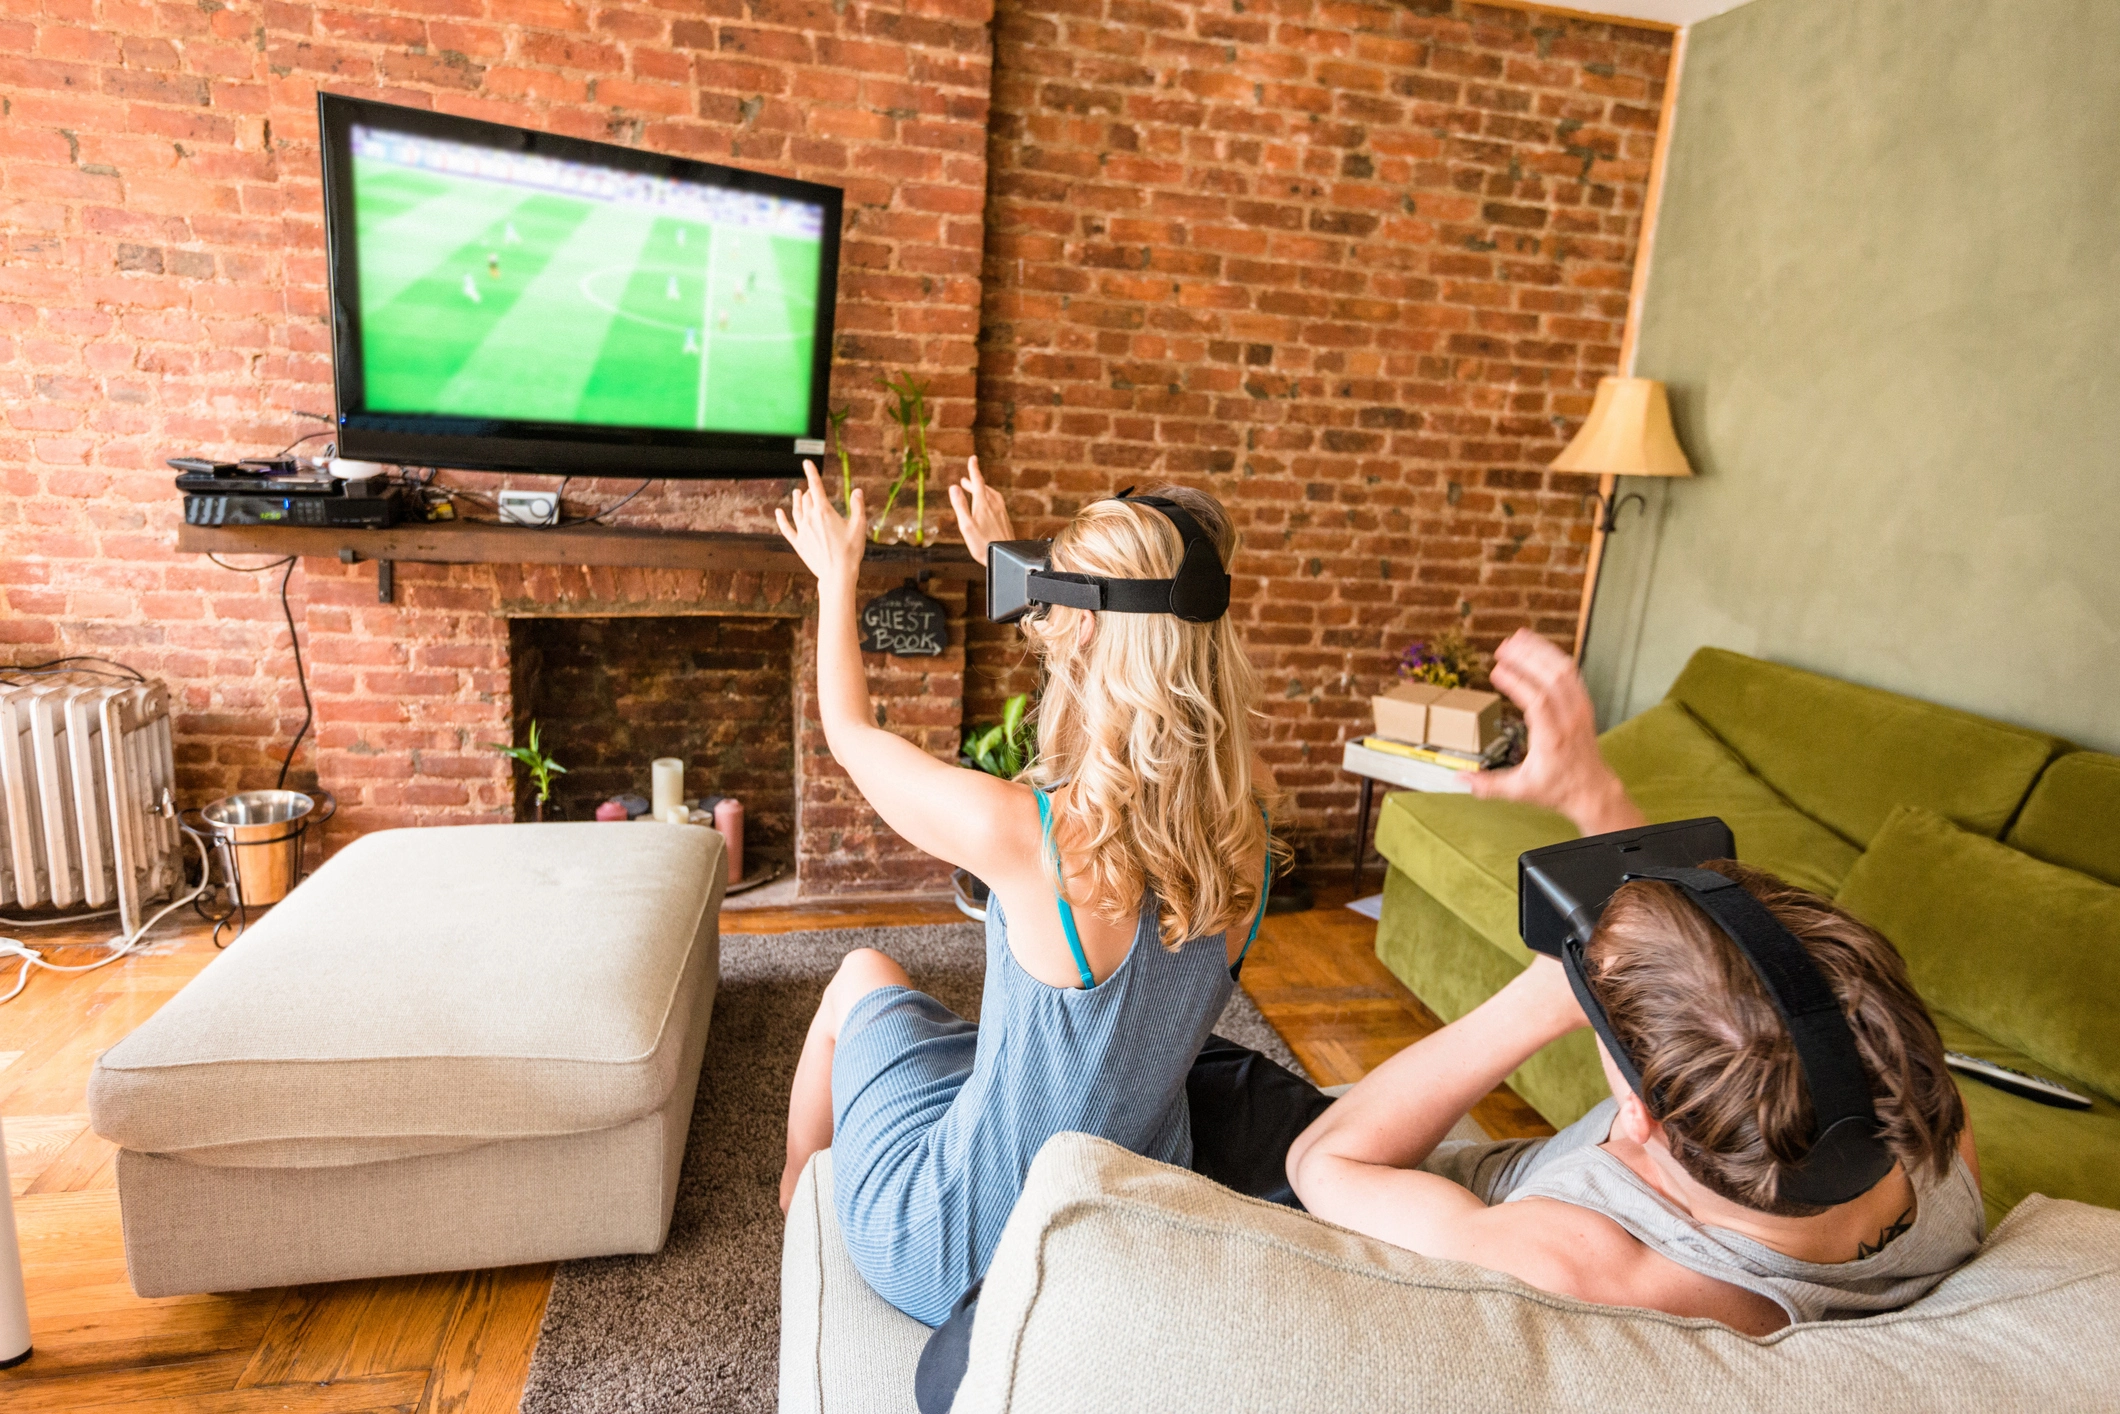 The Future of Sports Viewing on Augmented Reality Platforms